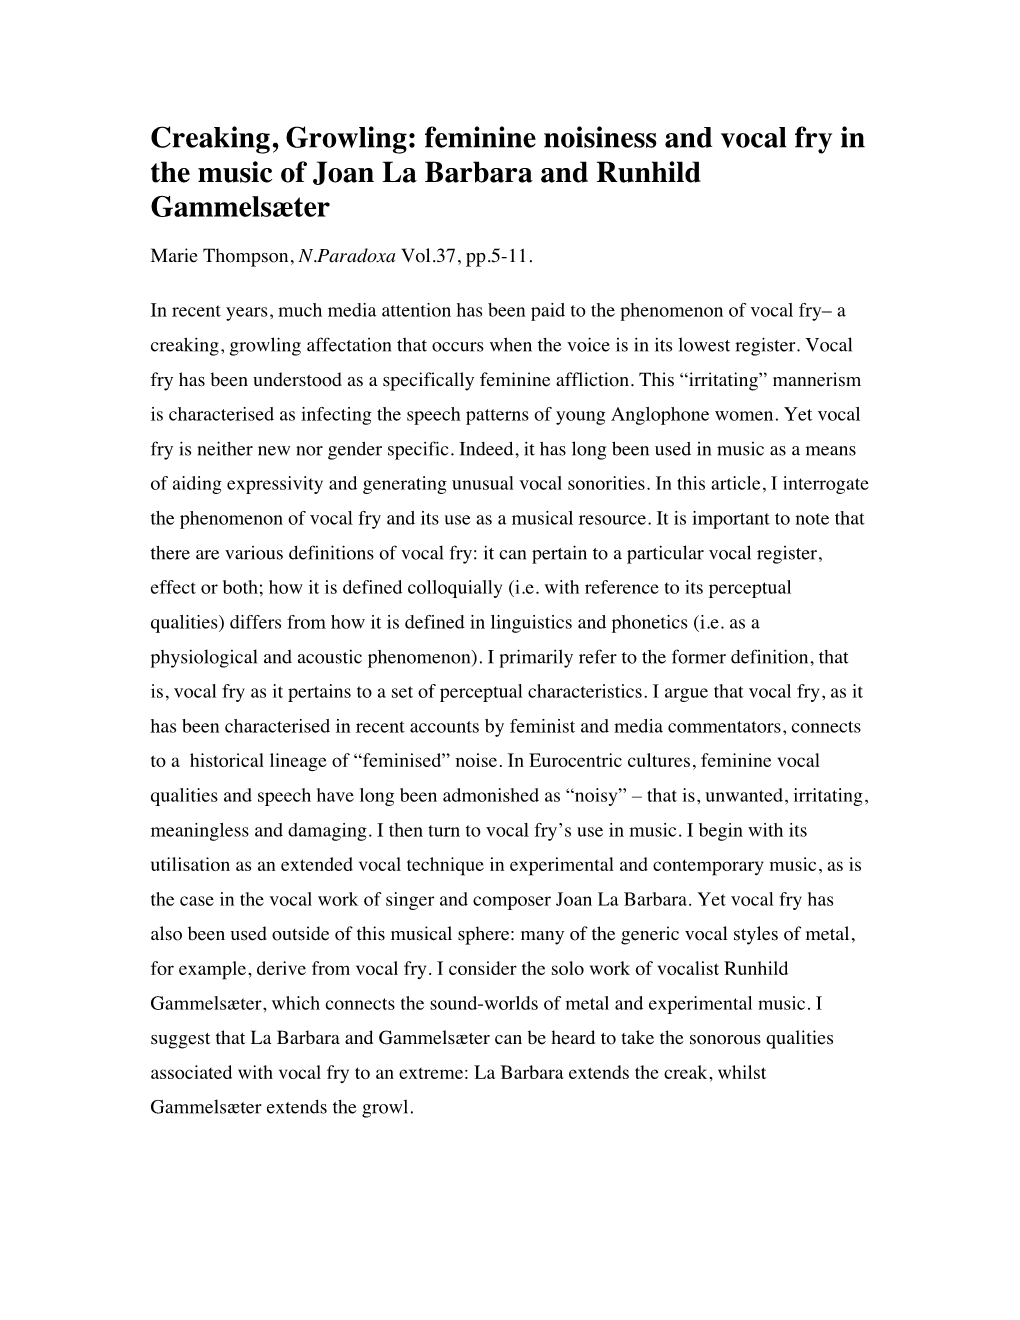 Creaking, Growling: Feminine Noisiness and Vocal Fry in the Music of �Joan La Barbara and Runhild Gammelsæter